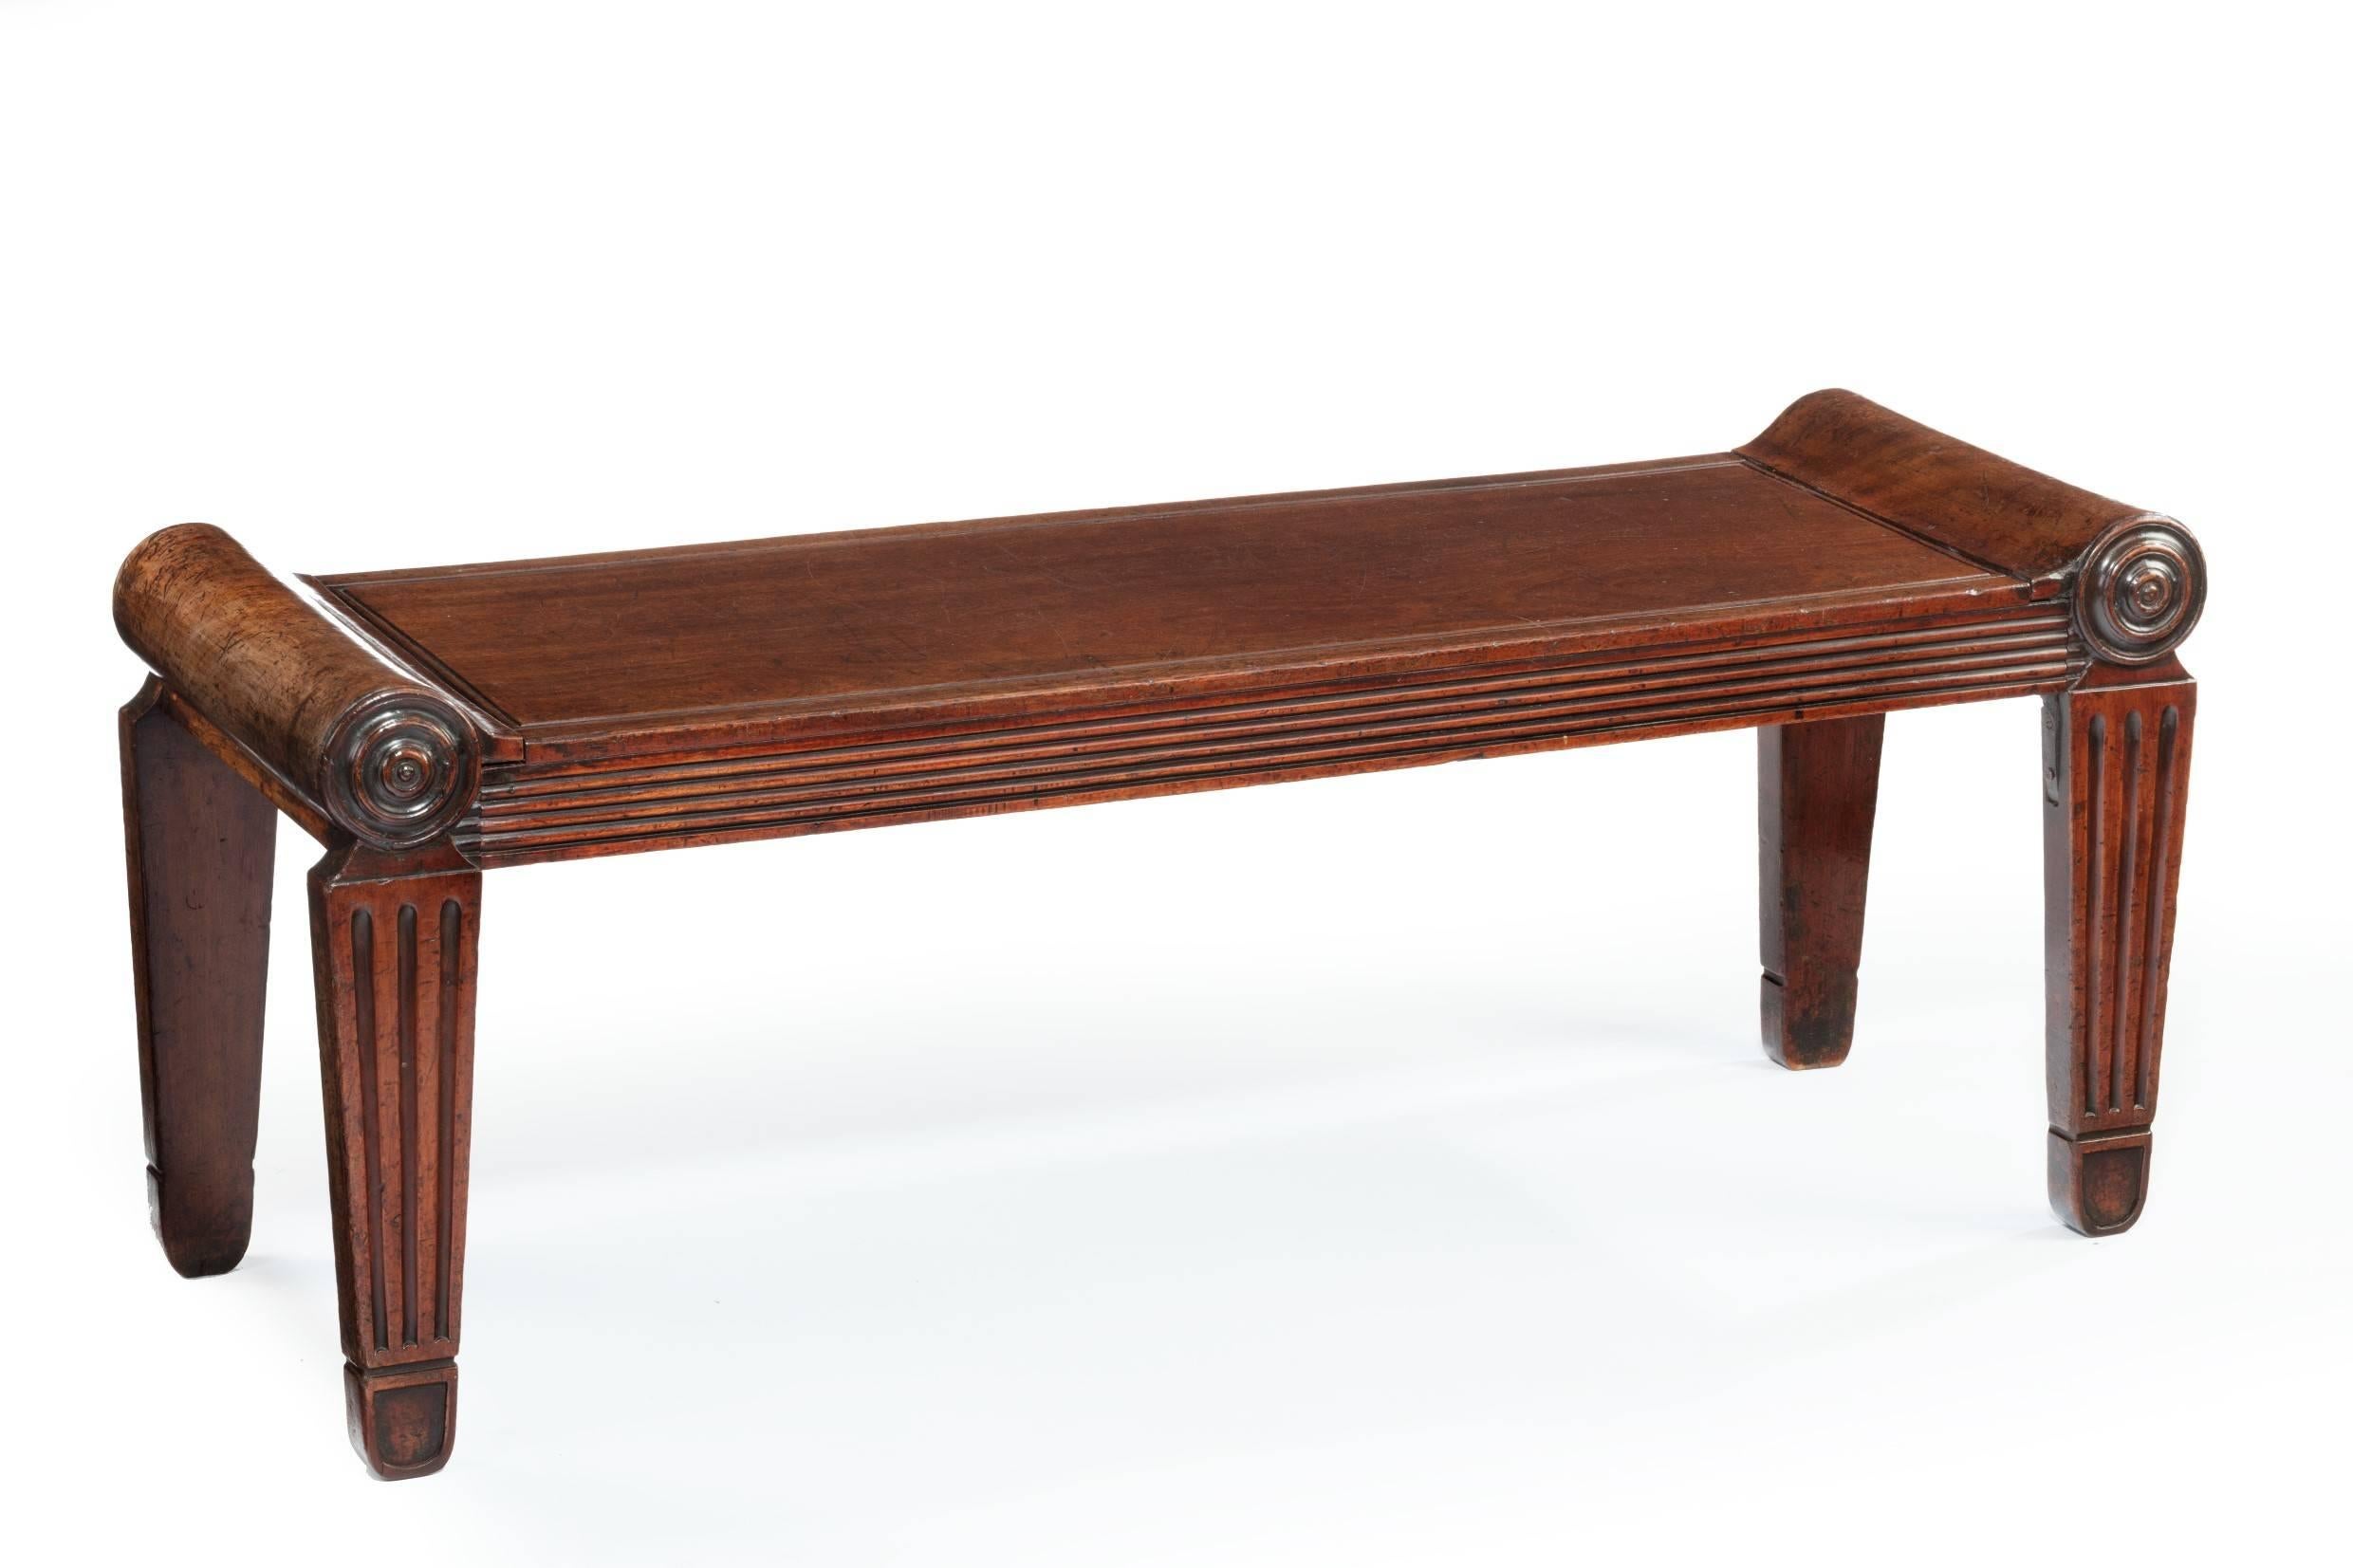 Very smart mahogany hall bench in the manner of Charles Heathcote Tatham. The Roman seat pattern. Issued in etchings of ancient ornamental architecture, 1799. Rectangular top bench with reeded frieze, tapered legs headed with roundels.